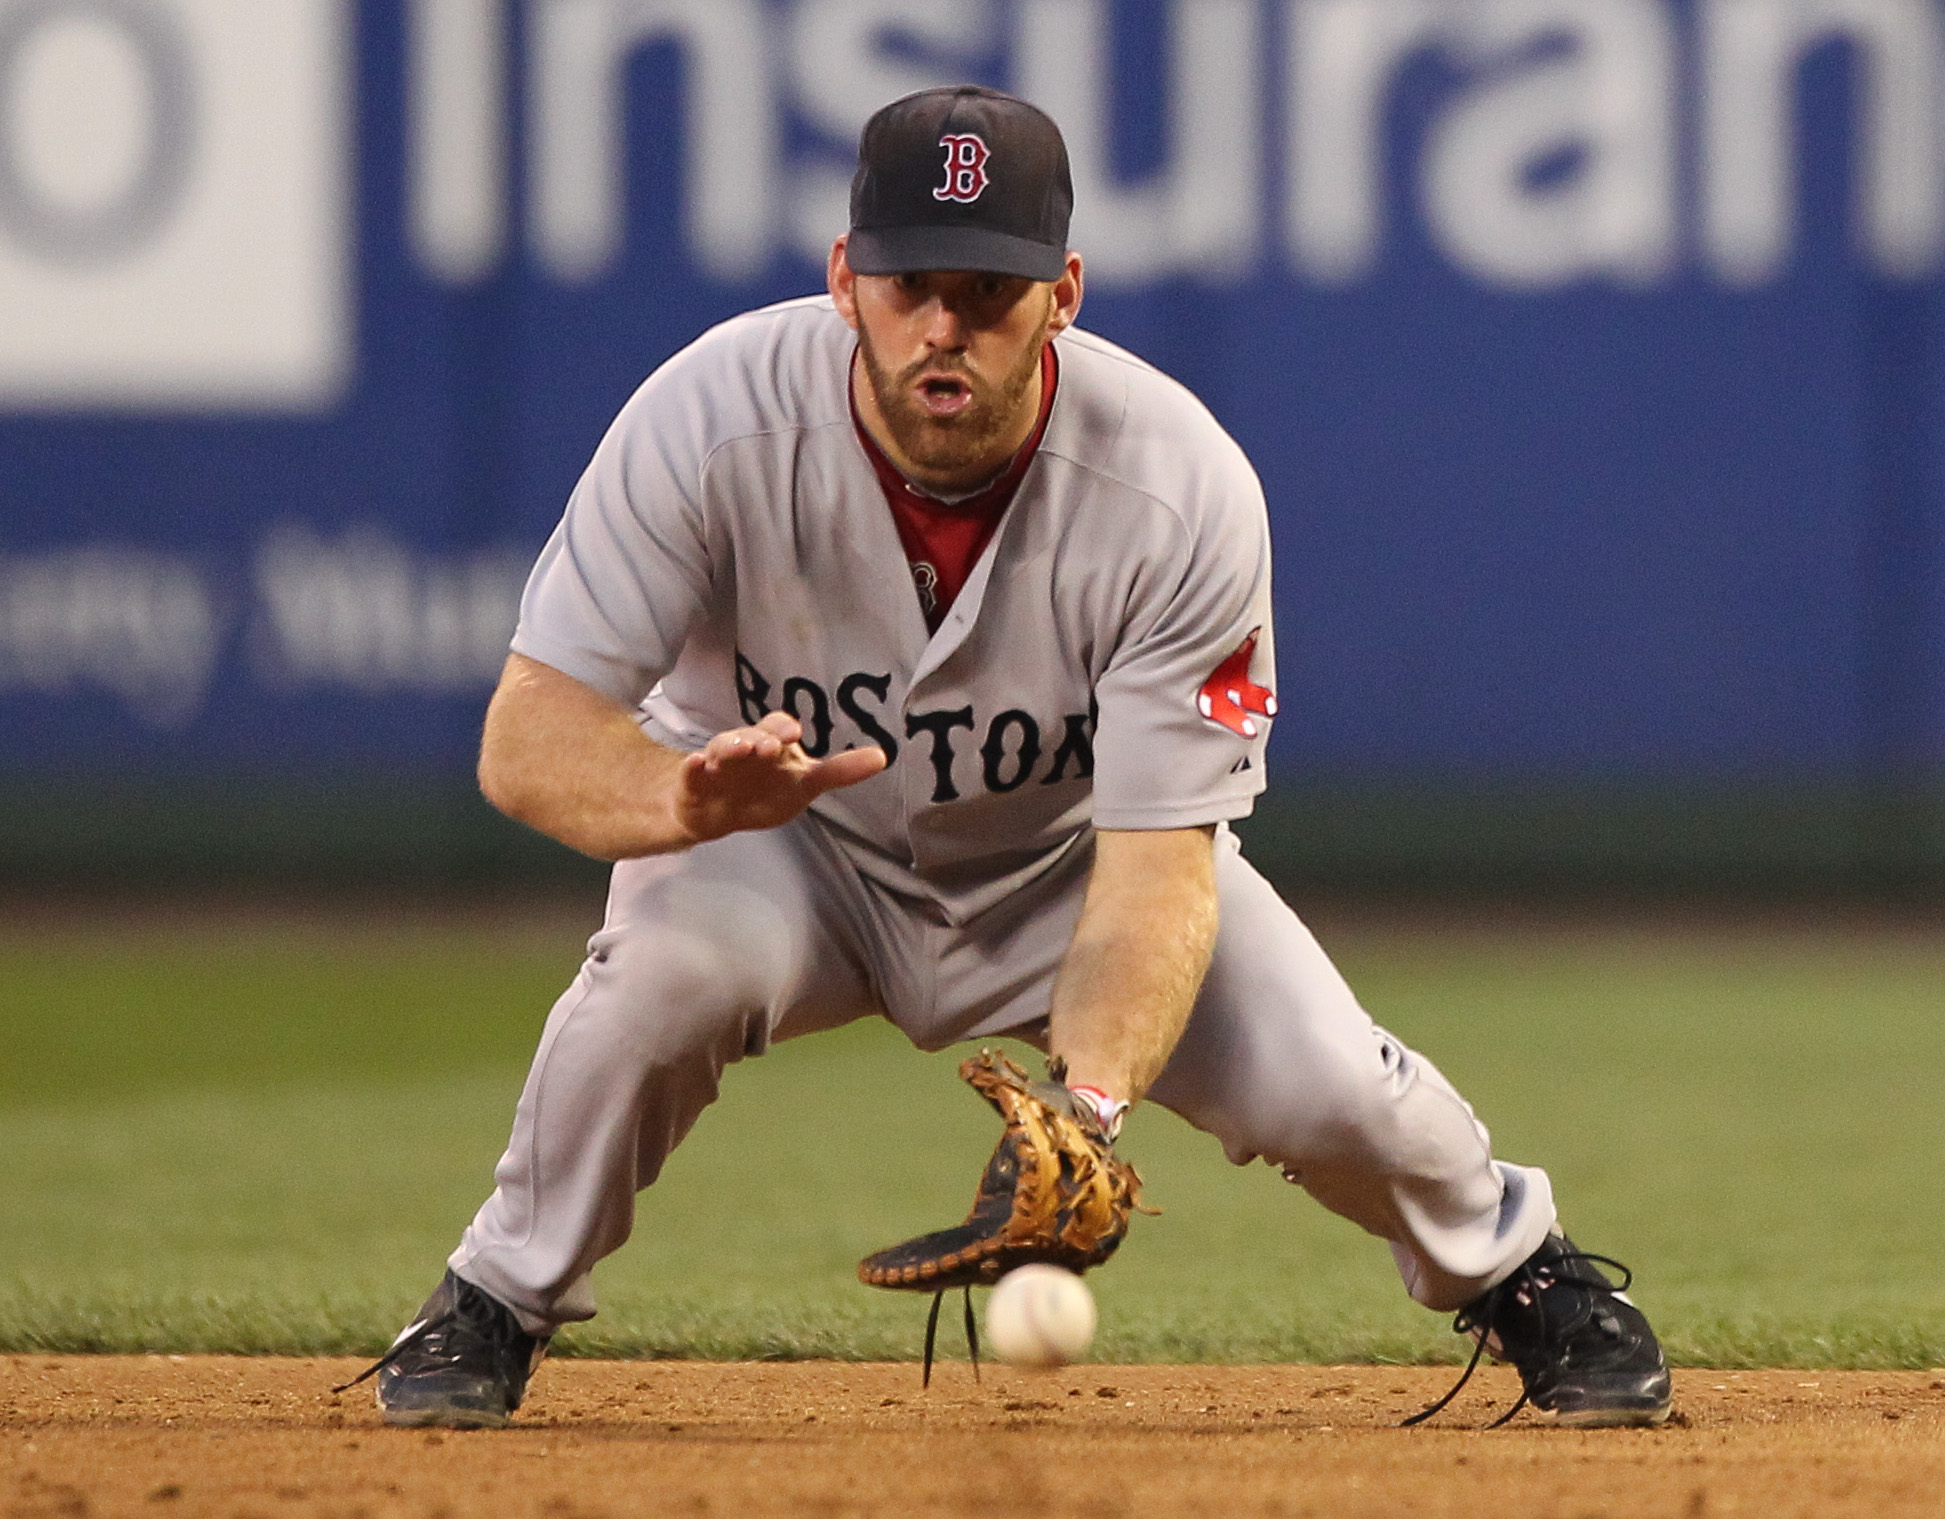 Kevin Youkilis Highlights, Take a look back at Kevin Youkilis' greatest  moments., By Boston Red Sox Highlights